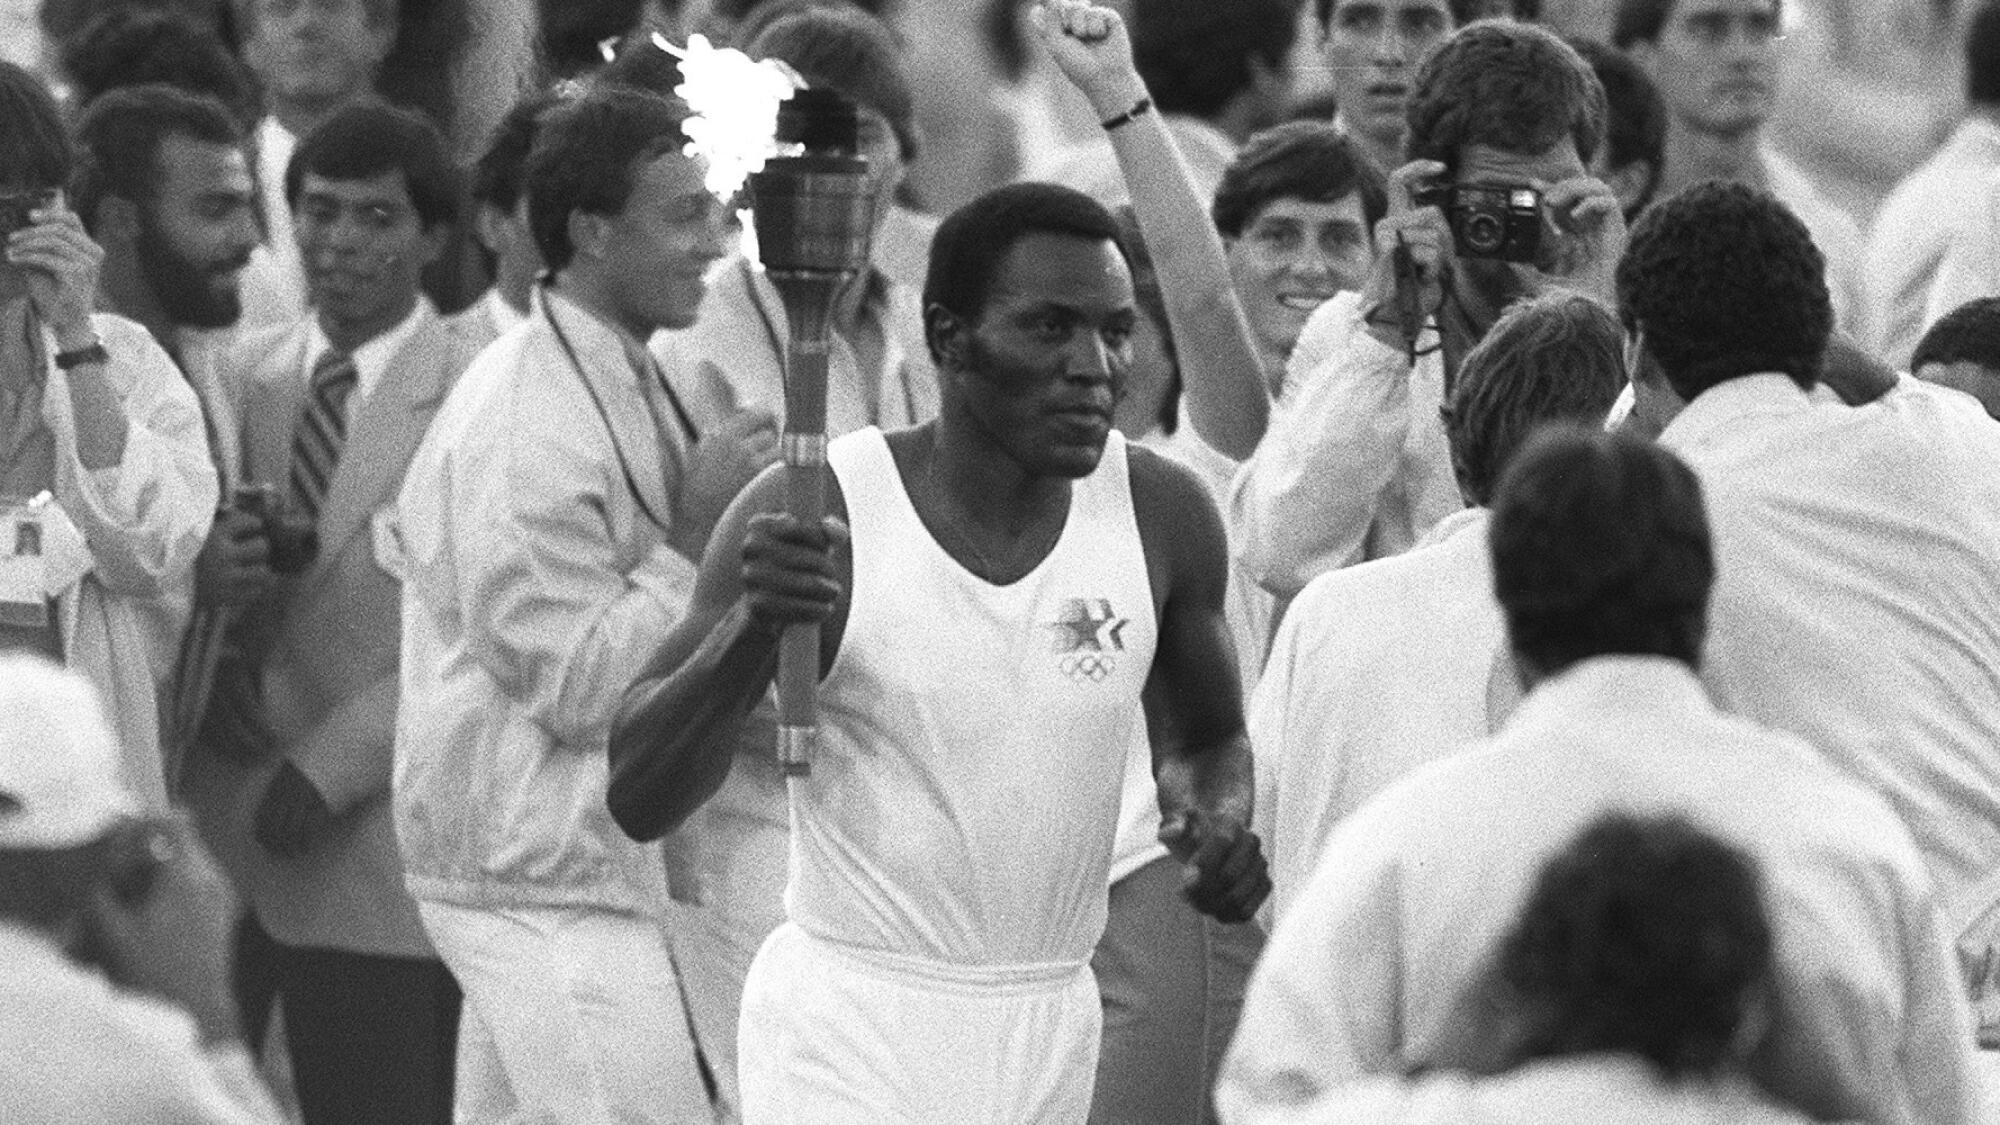 Rafer Johnson runs around the track at the Coliseum before lighting the Olympic flame on July 28, 1984.